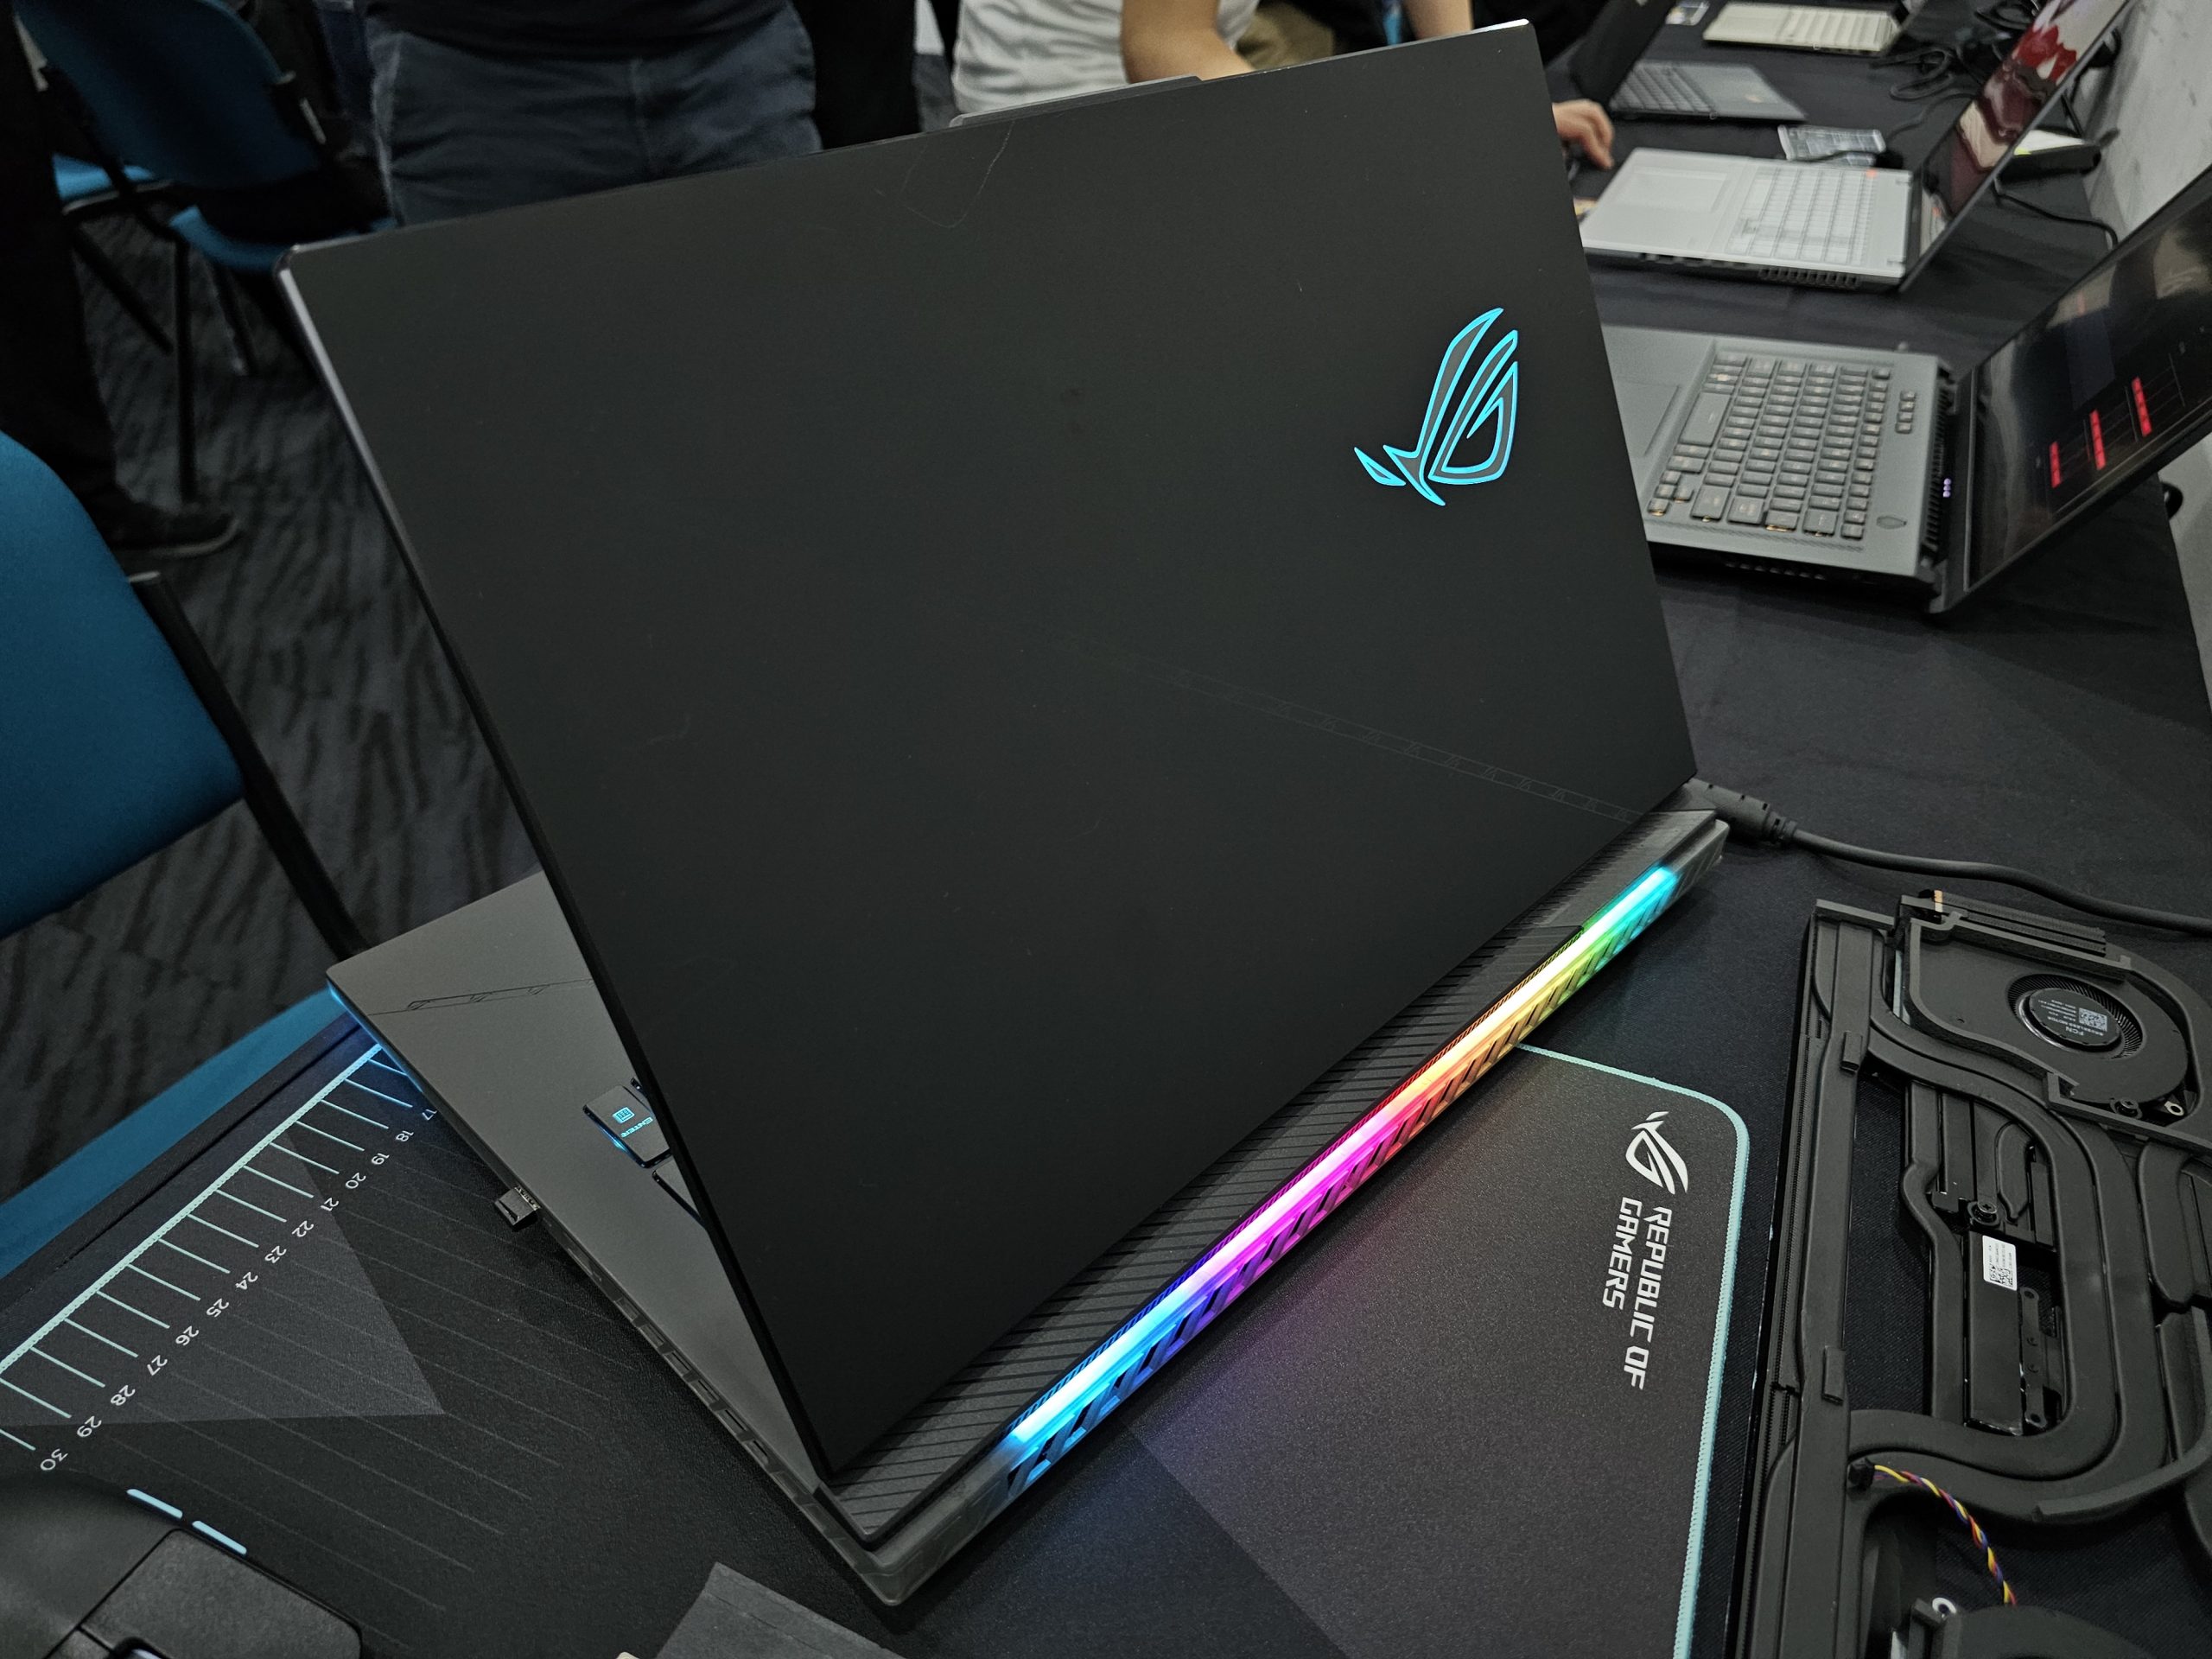 Hands On With Latest ASUS Laptop Lineup At ASUS CES 2023 Media Tour 18